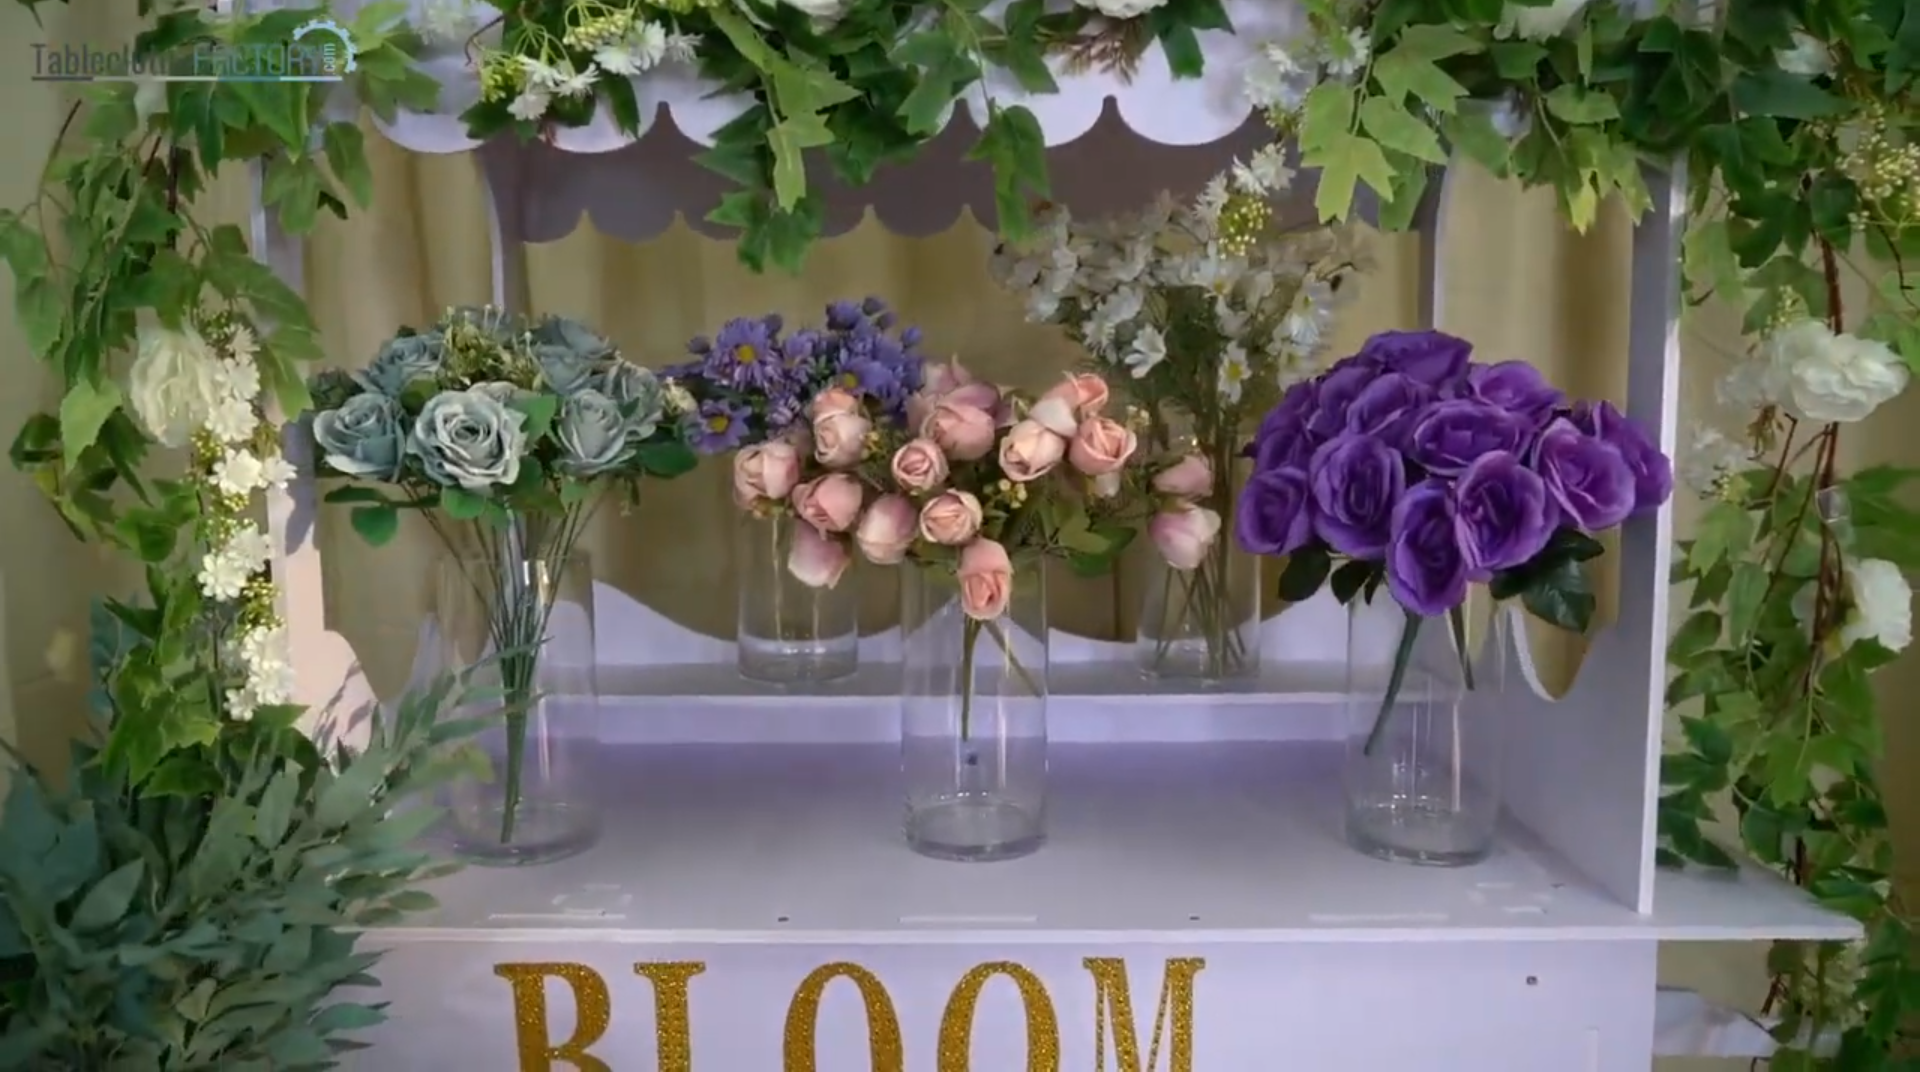 Stylish Mother's Day decor with a bloom bar and beautiful floral displays.